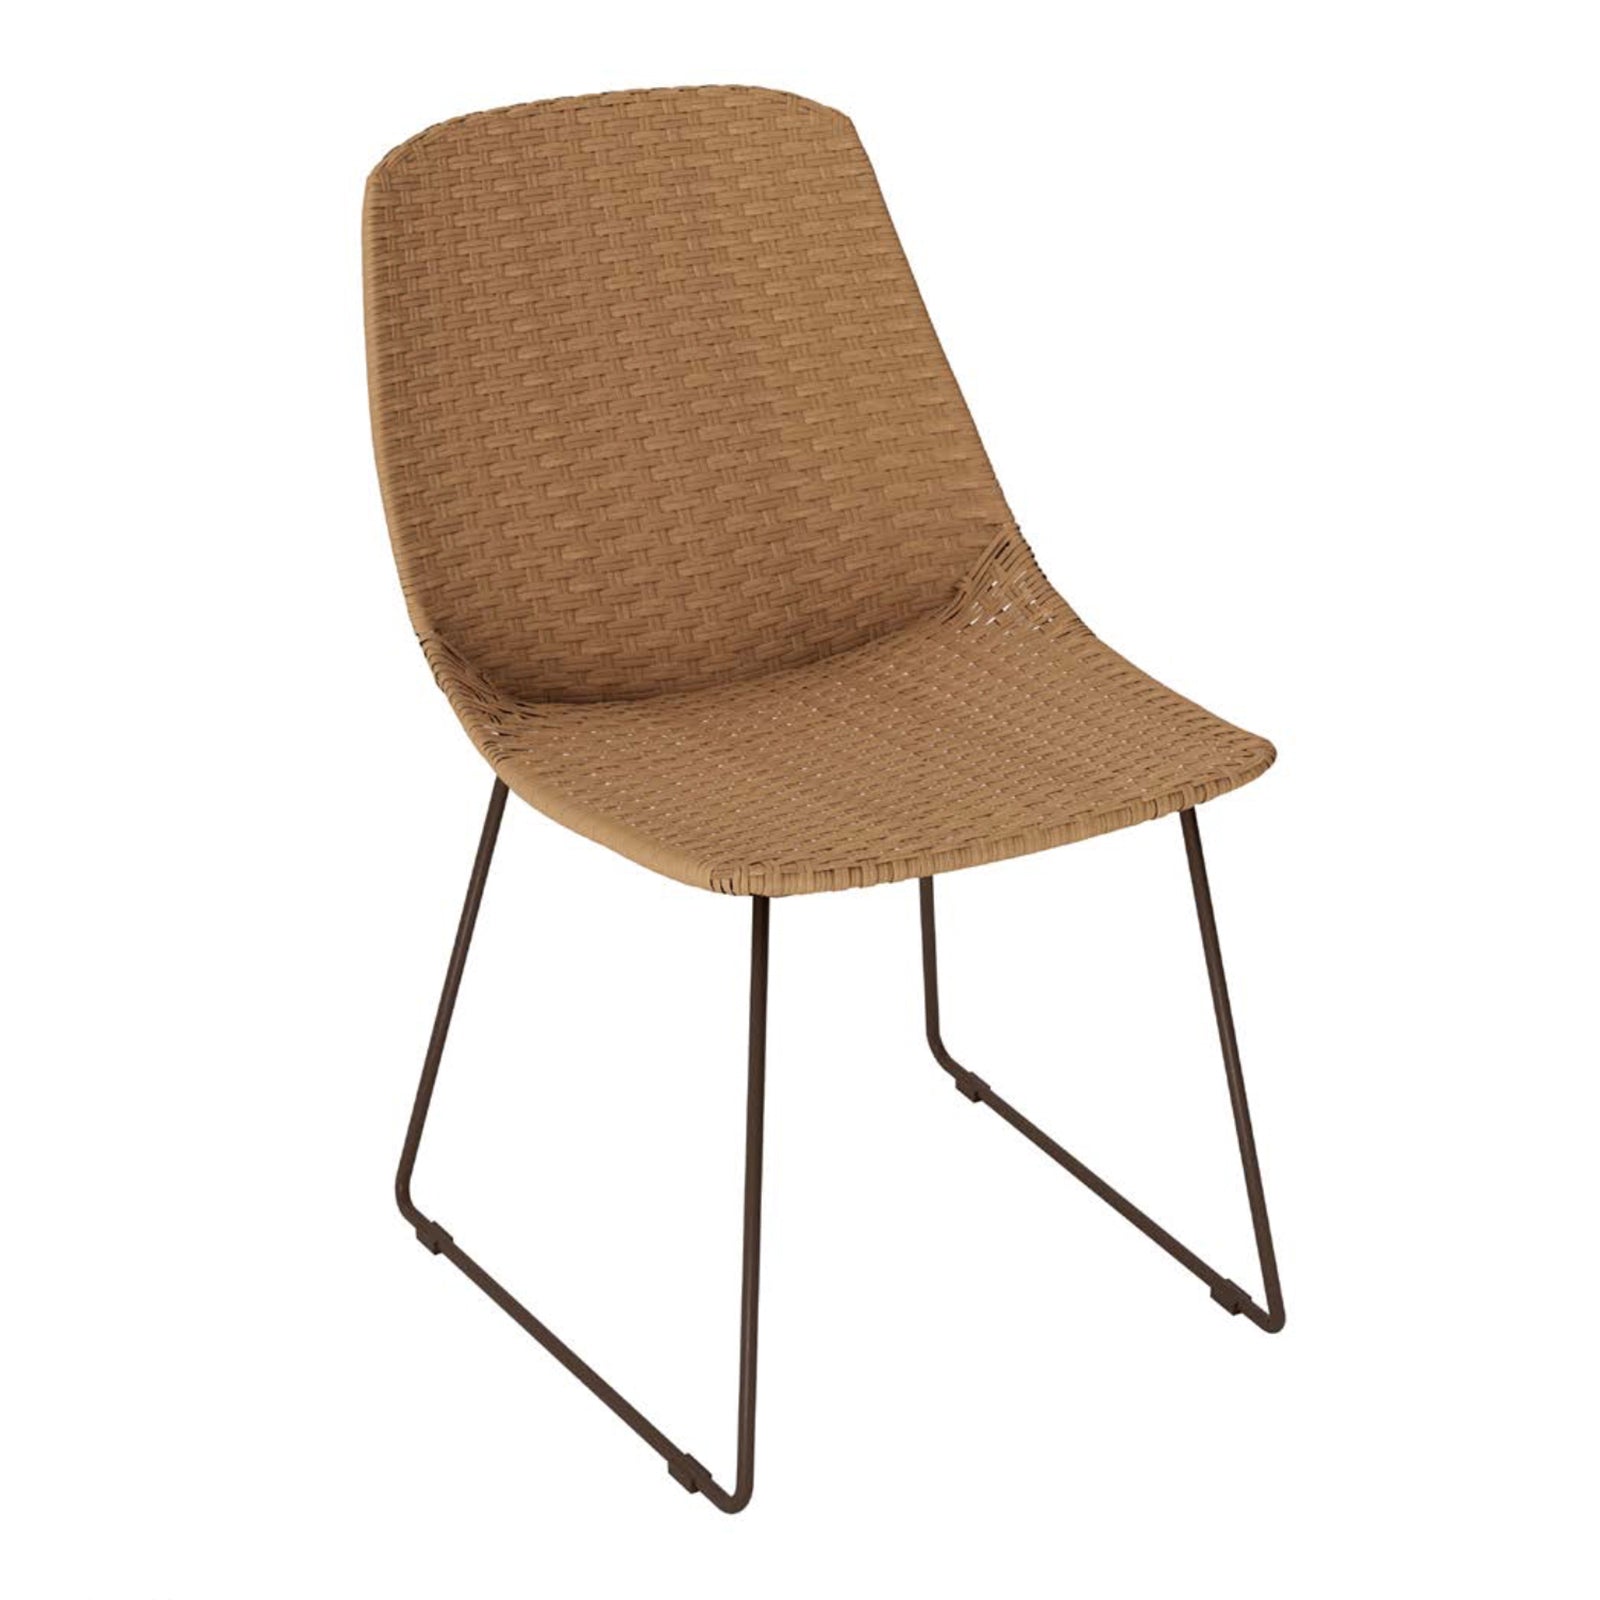 Design Warehouse Mia Outdoor Dining Side Chair 128576